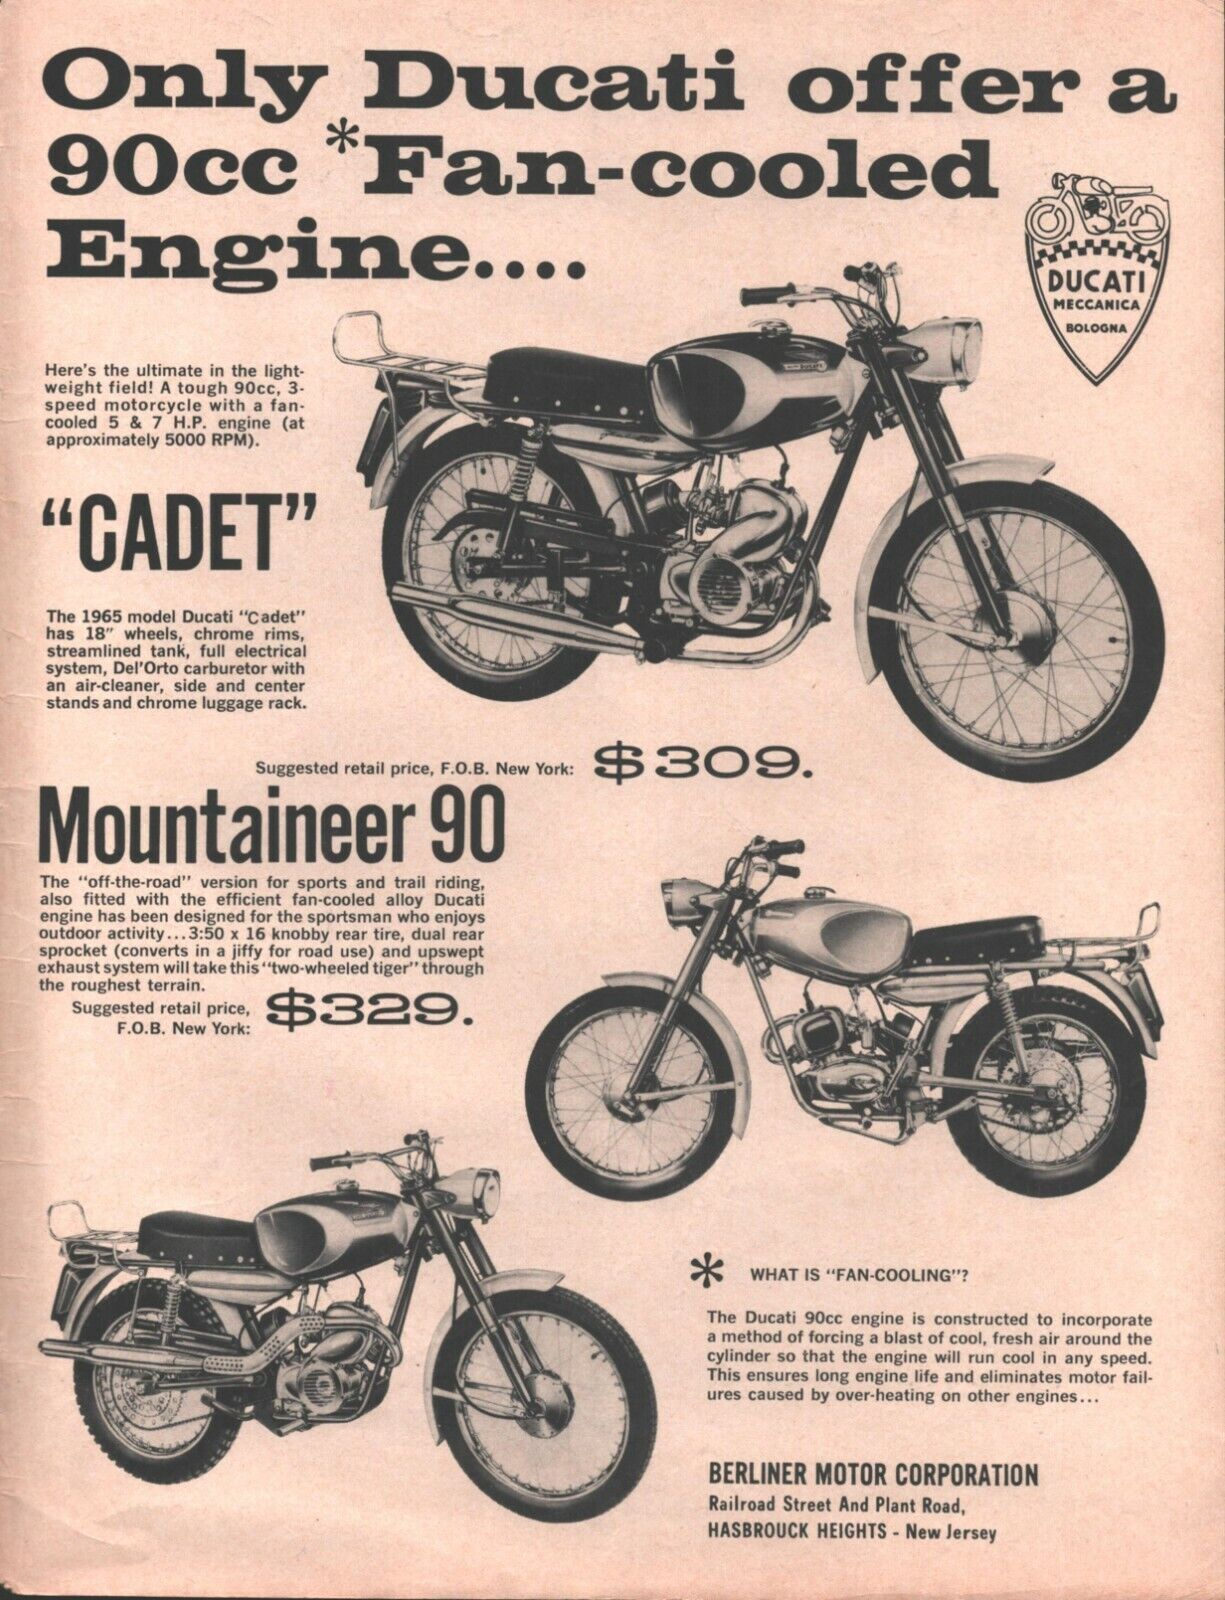 1964 Ducati Meccania Bologna Cadet & Mountaineer 90 - Vintage Motorcycle Ad